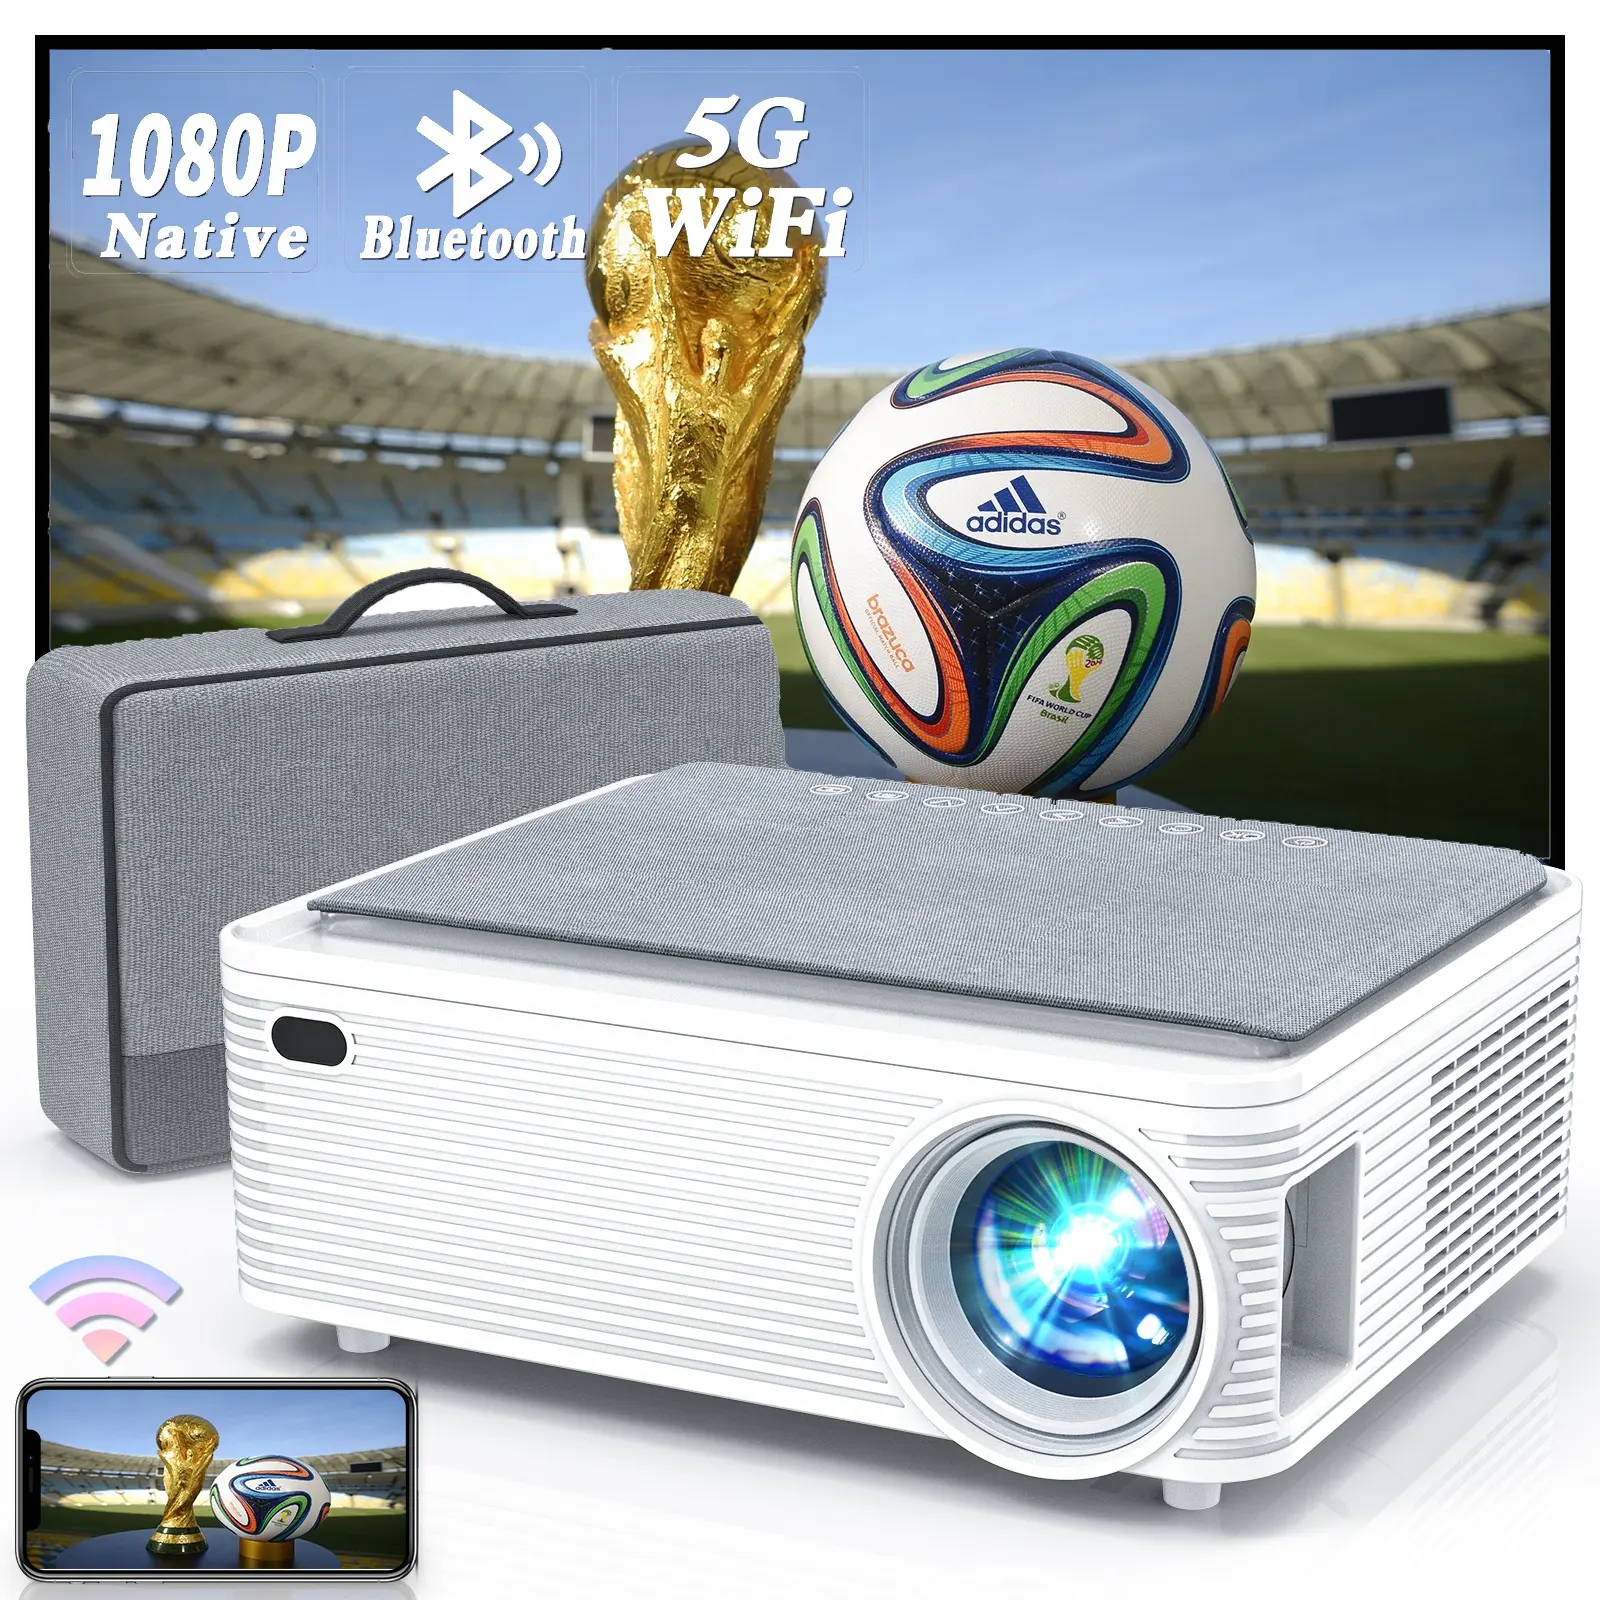 ZAOLIGHTEC X5 PS400X9500 Lumens XGA HDMI Networkable Short Throw Projector for Home and Office